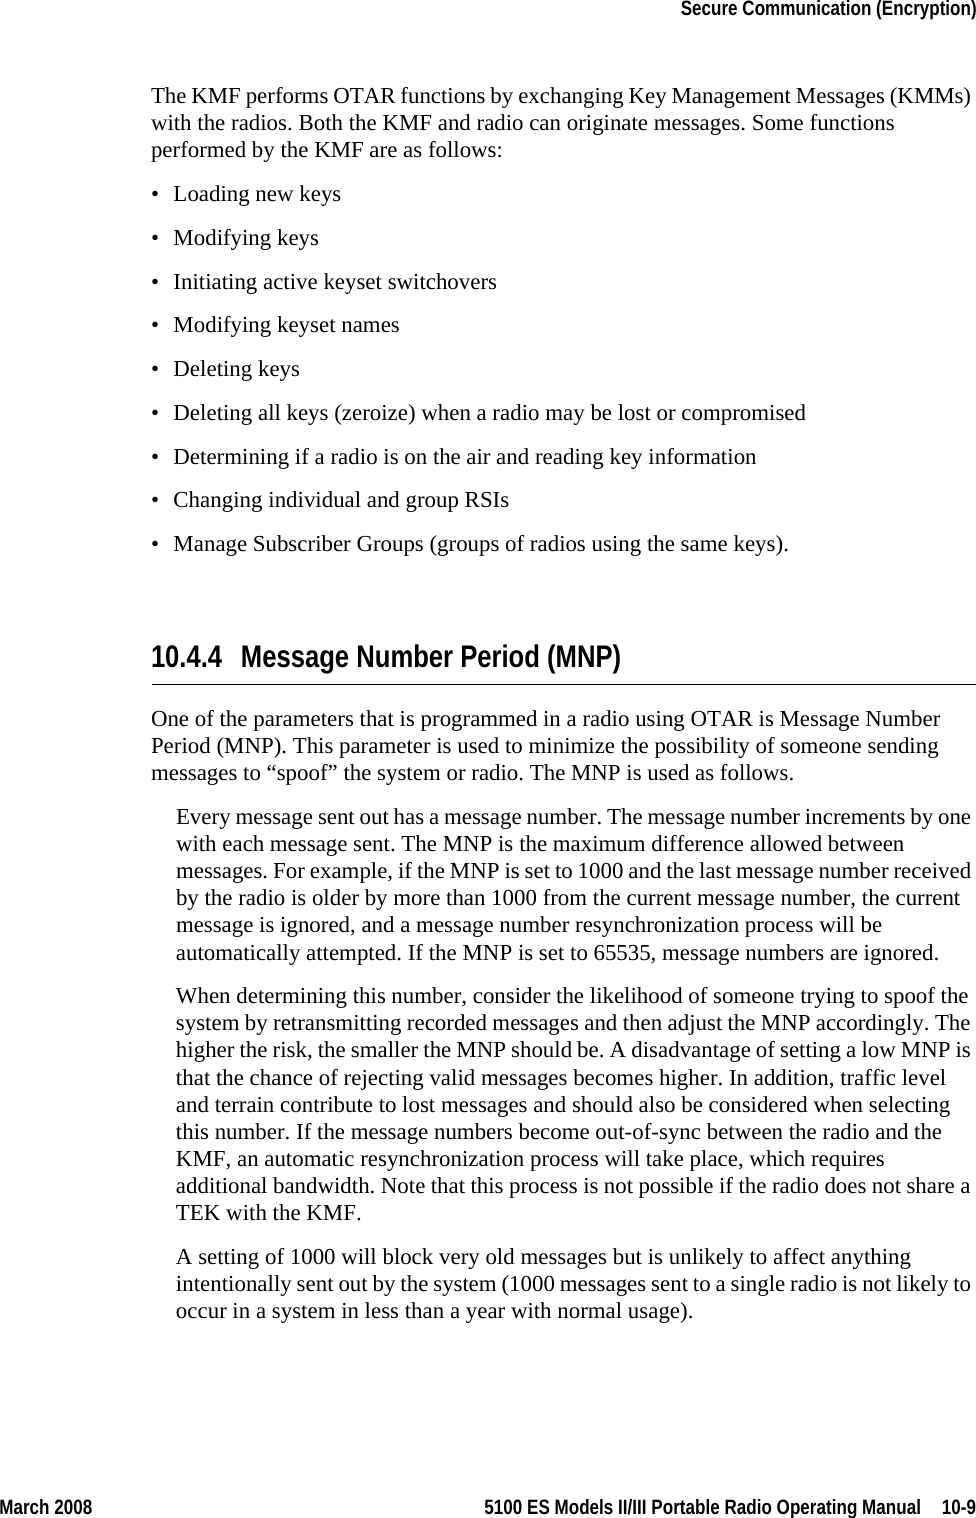 March 2008 5100 ES Models II/III Portable Radio Operating Manual  10-9Secure Communication (Encryption)The KMF performs OTAR functions by exchanging Key Management Messages (KMMs) with the radios. Both the KMF and radio can originate messages. Some functions performed by the KMF are as follows:• Loading new keys• Modifying keys• Initiating active keyset switchovers• Modifying keyset names• Deleting keys• Deleting all keys (zeroize) when a radio may be lost or compromised• Determining if a radio is on the air and reading key information• Changing individual and group RSIs• Manage Subscriber Groups (groups of radios using the same keys).10.4.4 Message Number Period (MNP)One of the parameters that is programmed in a radio using OTAR is Message Number Period (MNP). This parameter is used to minimize the possibility of someone sending messages to “spoof” the system or radio. The MNP is used as follows.Every message sent out has a message number. The message number increments by one with each message sent. The MNP is the maximum difference allowed between messages. For example, if the MNP is set to 1000 and the last message number received by the radio is older by more than 1000 from the current message number, the current message is ignored, and a message number resynchronization process will be automatically attempted. If the MNP is set to 65535, message numbers are ignored.When determining this number, consider the likelihood of someone trying to spoof the system by retransmitting recorded messages and then adjust the MNP accordingly. The higher the risk, the smaller the MNP should be. A disadvantage of setting a low MNP is that the chance of rejecting valid messages becomes higher. In addition, traffic level and terrain contribute to lost messages and should also be considered when selecting this number. If the message numbers become out-of-sync between the radio and the KMF, an automatic resynchronization process will take place, which requires additional bandwidth. Note that this process is not possible if the radio does not share a TEK with the KMF.A setting of 1000 will block very old messages but is unlikely to affect anything intentionally sent out by the system (1000 messages sent to a single radio is not likely to occur in a system in less than a year with normal usage).